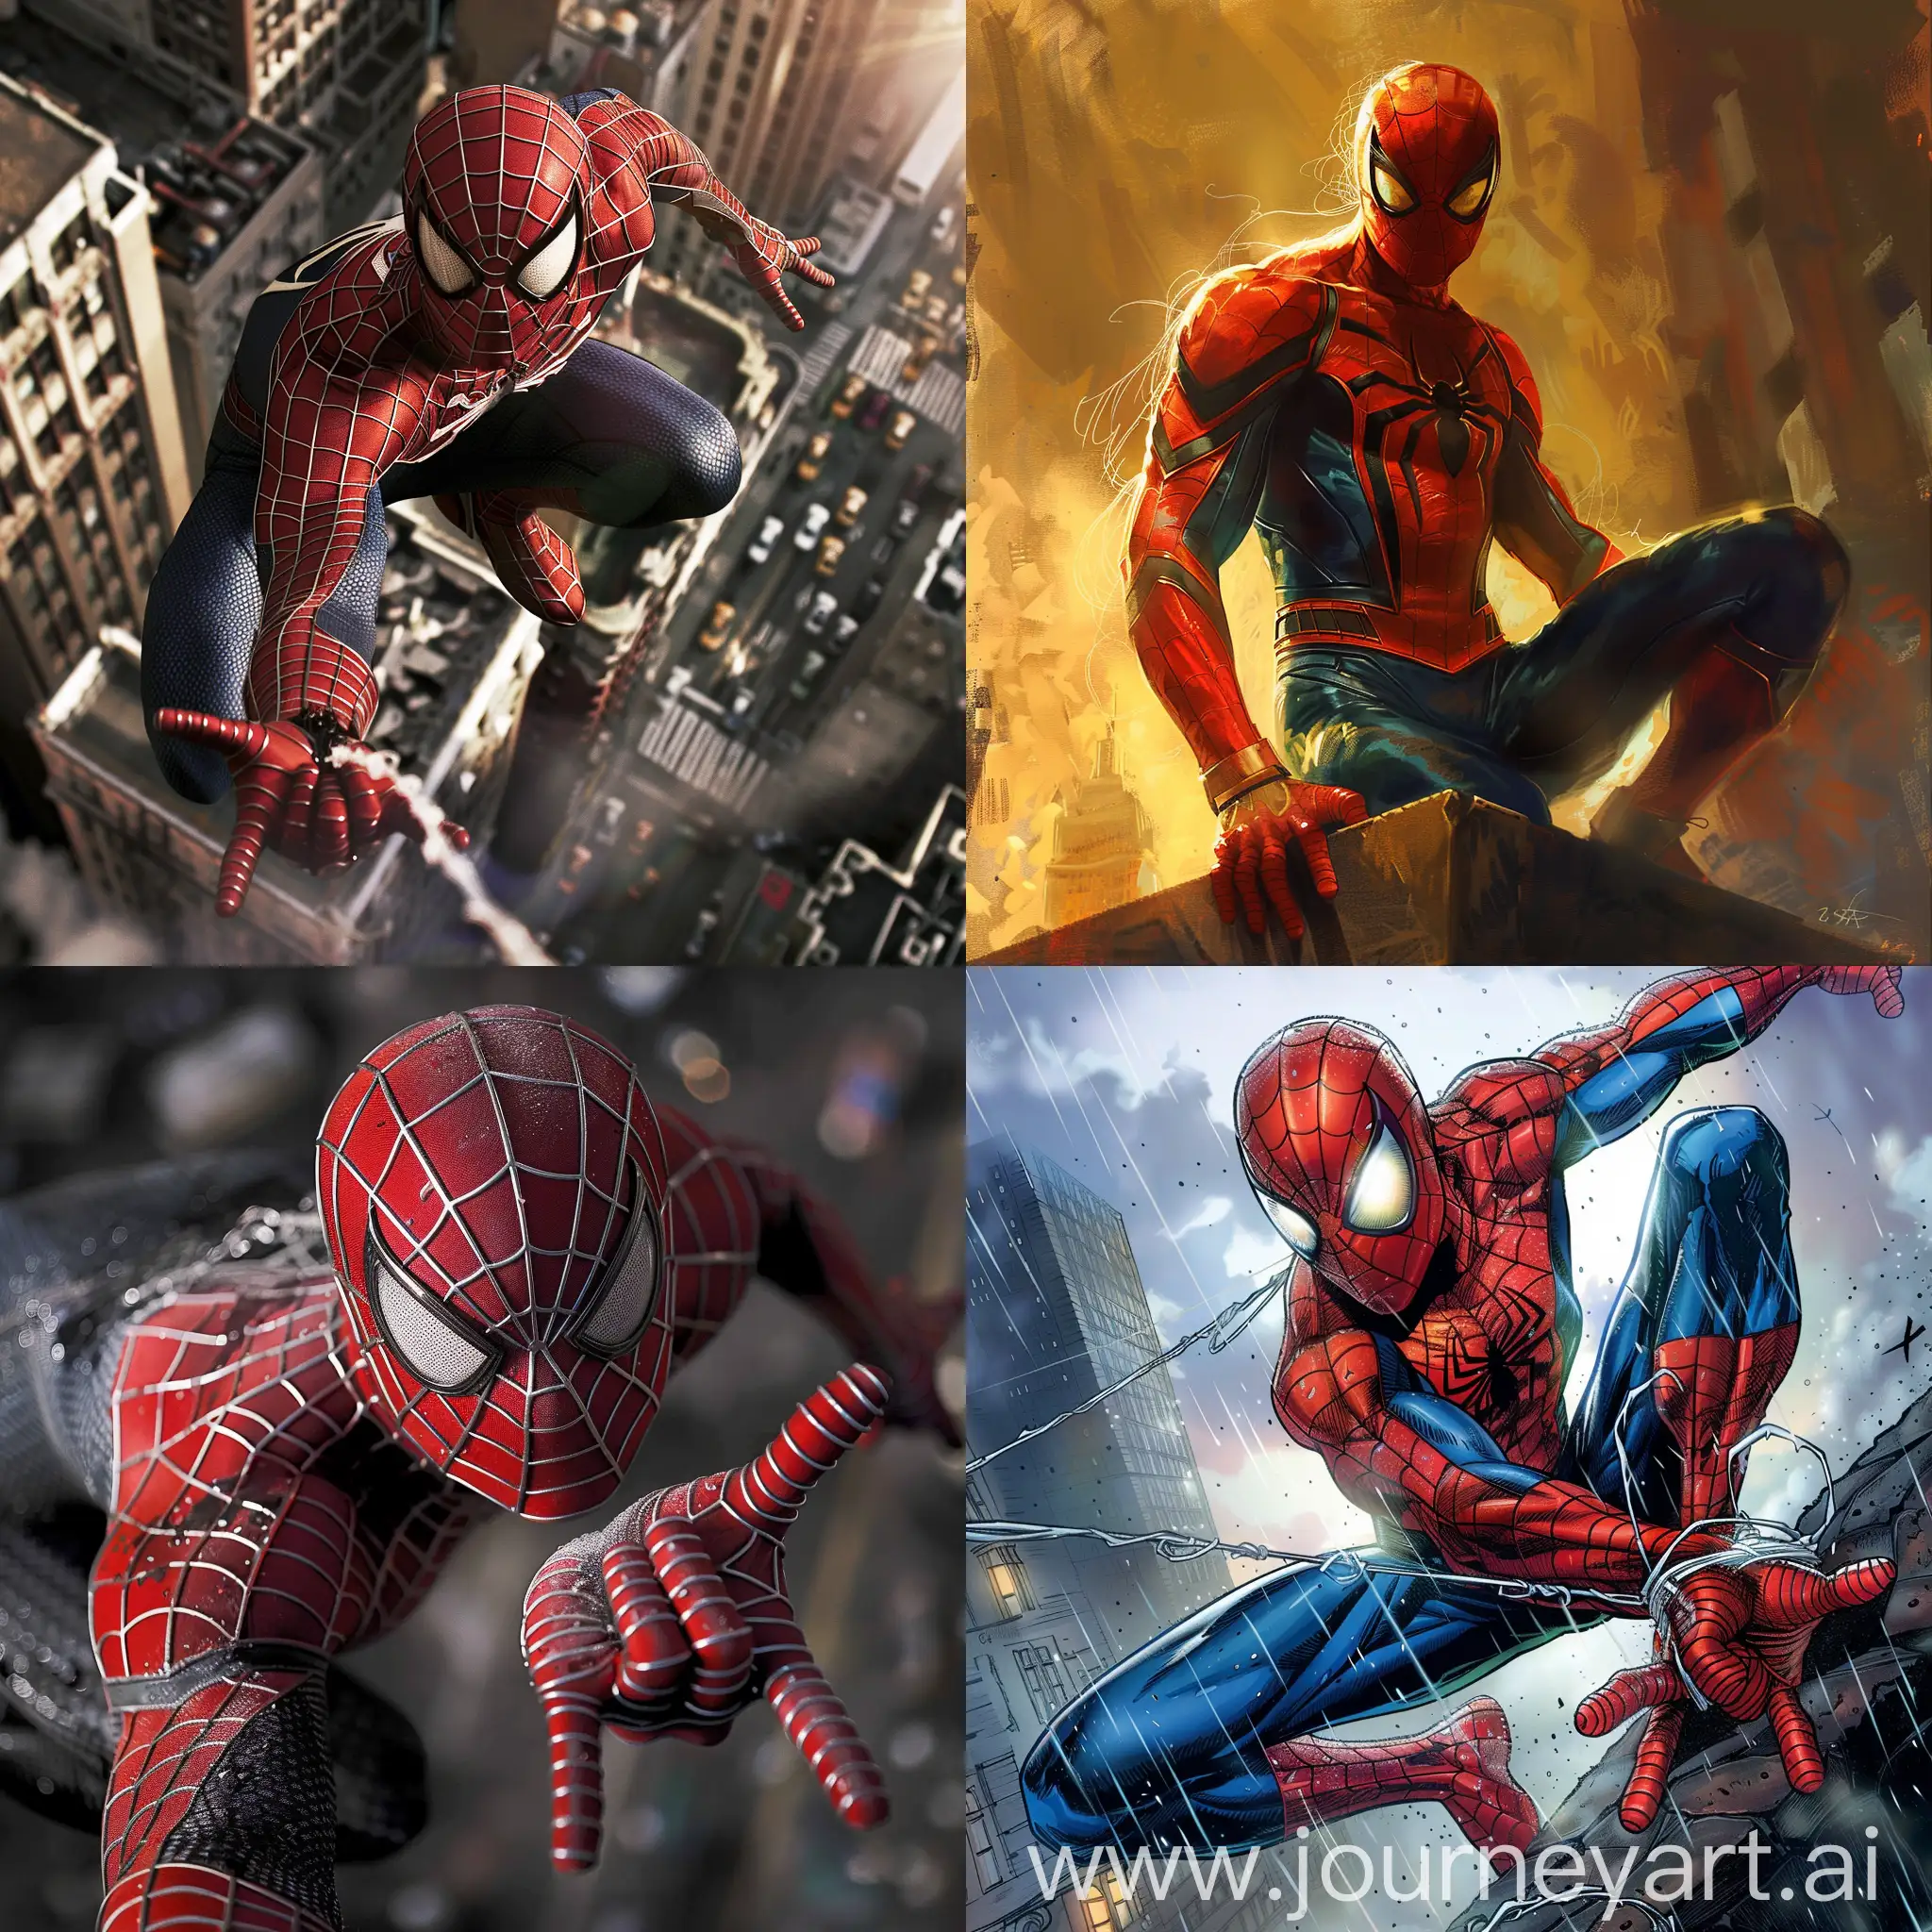 Spiderman-Action-Figure-with-Versatile-Poses-and-Artistic-Rendering-Limited-Edition-Collectible